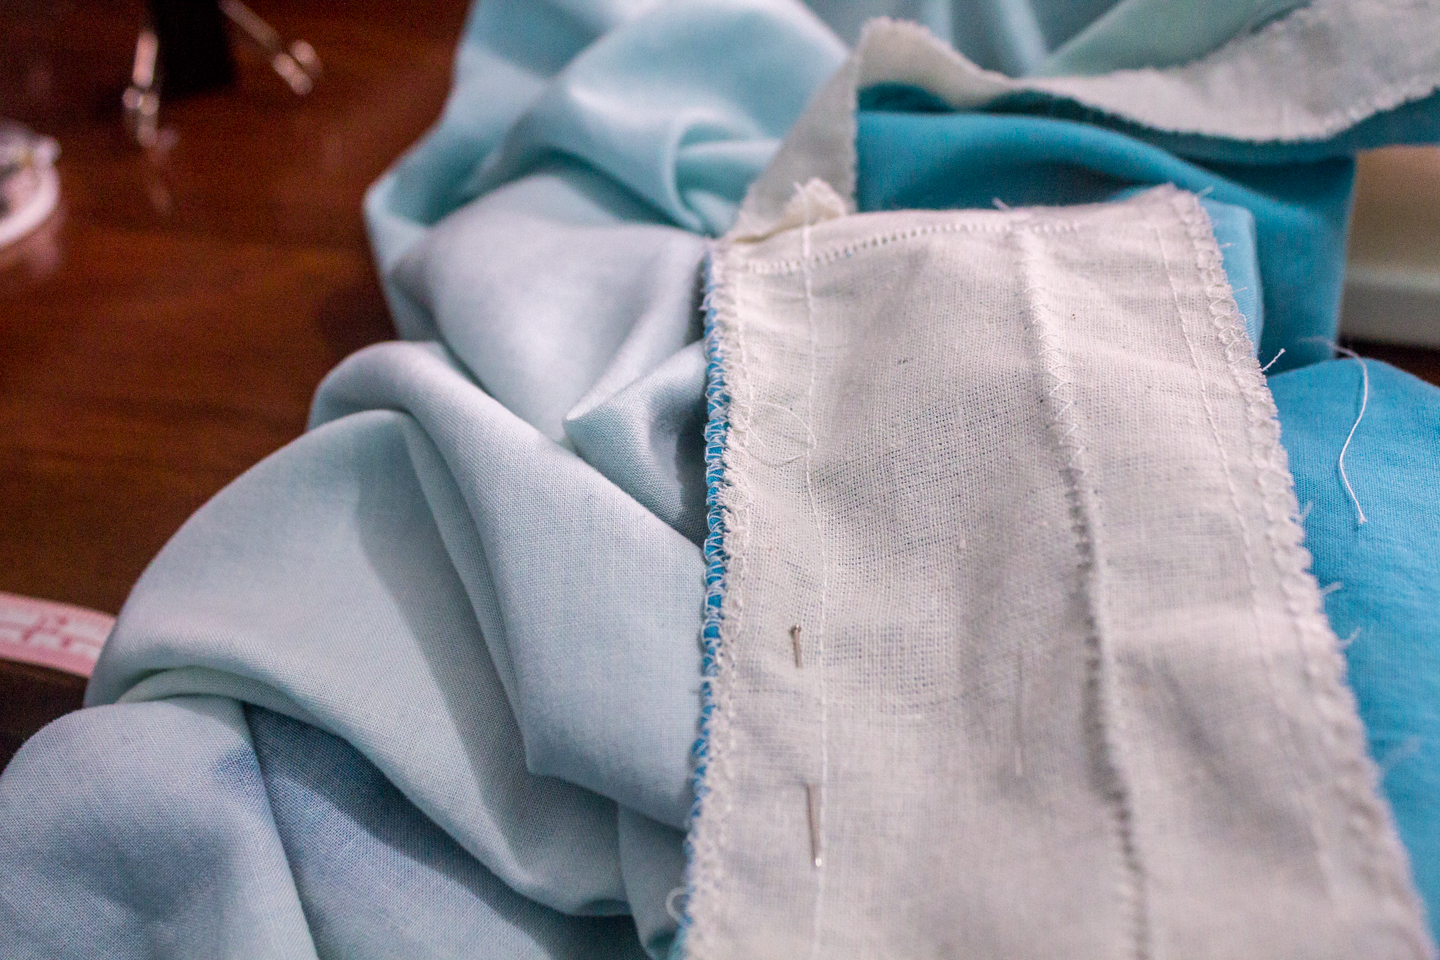 Now line up the calico layer to the plain fabric and use the over lock stitch to secure both the fabrics